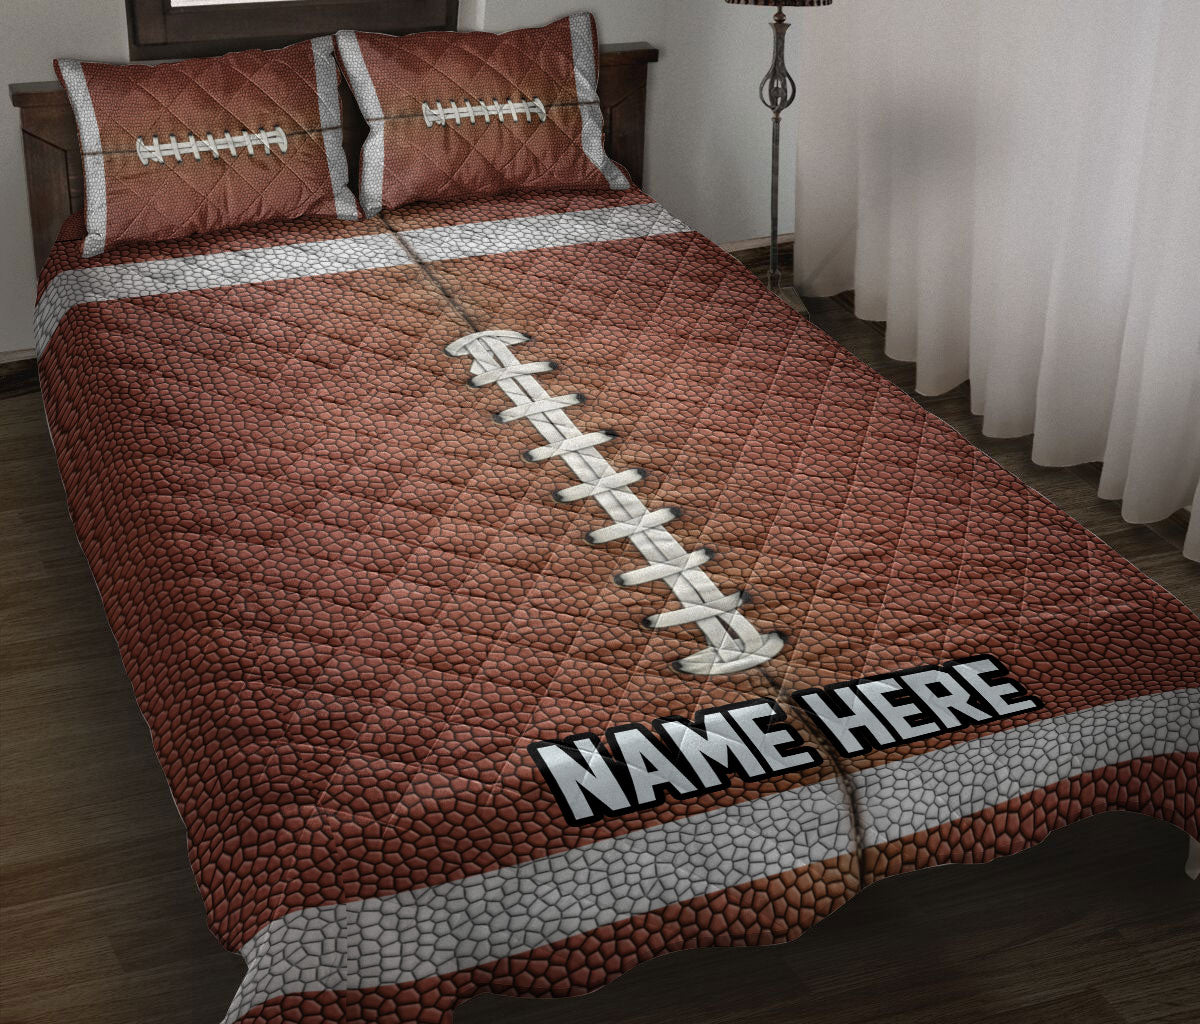 Ohaprints-Quilt-Bed-Set-Pillowcase-Football-Brown-Ball-Pattern-Gifts-For-Sports-Lover-Custom-Personalized-Name-Blanket-Bedspread-Bedding-1333-Throw (55'' x 60'')